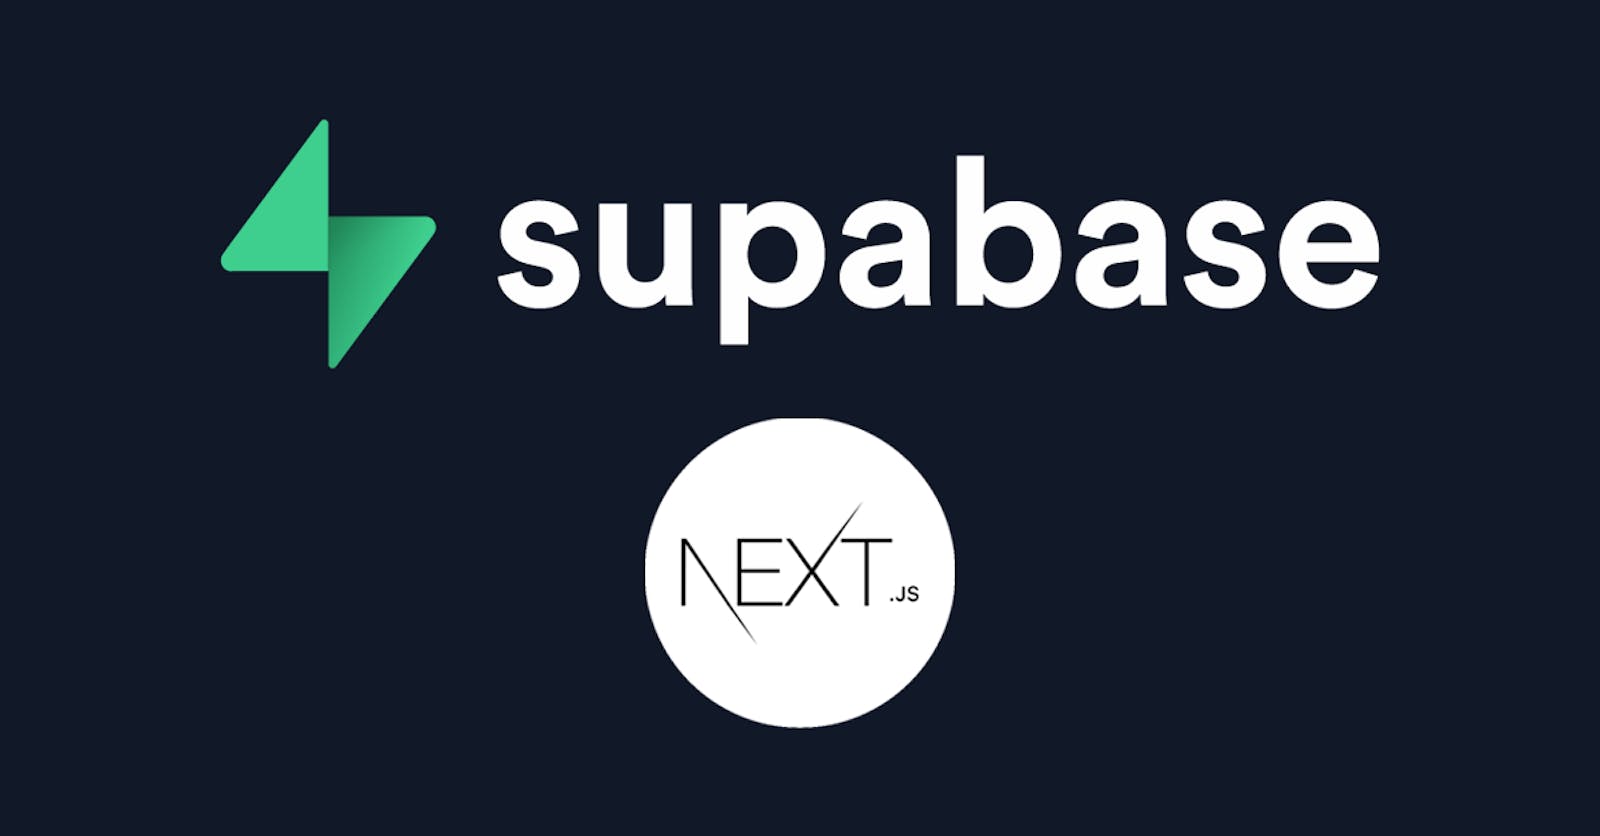 User Authentication in Next.js with Supabase